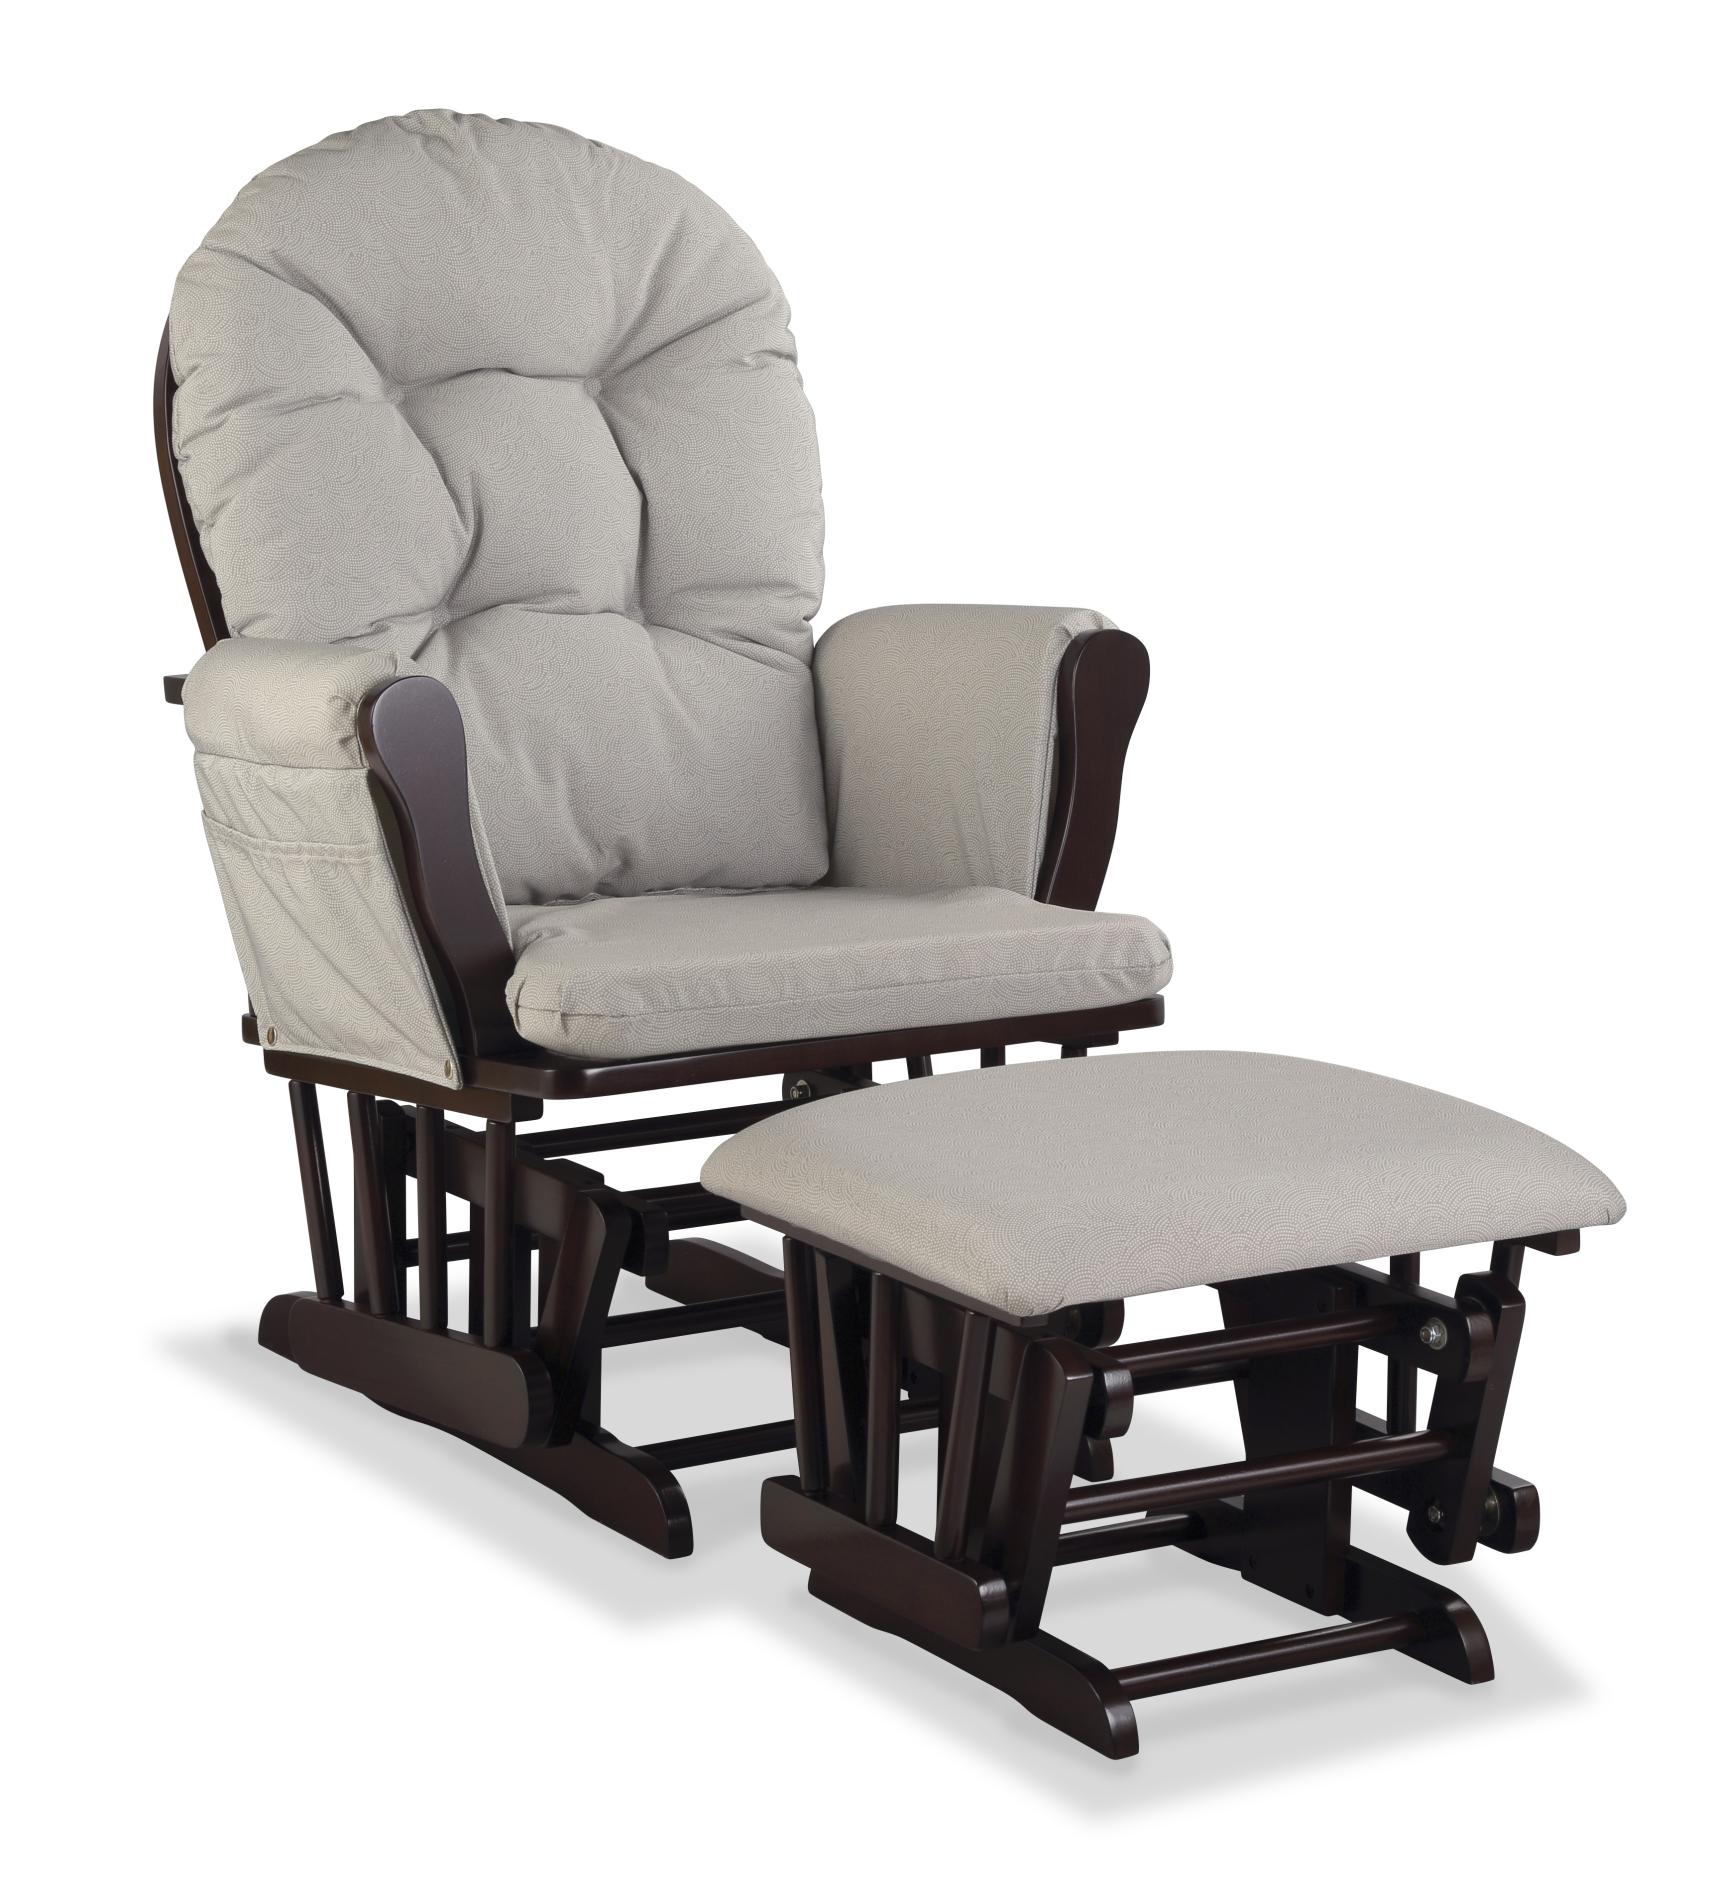 Graco Nursery Glider Chair & Ottoman | Shop Your Way: Online Shopping